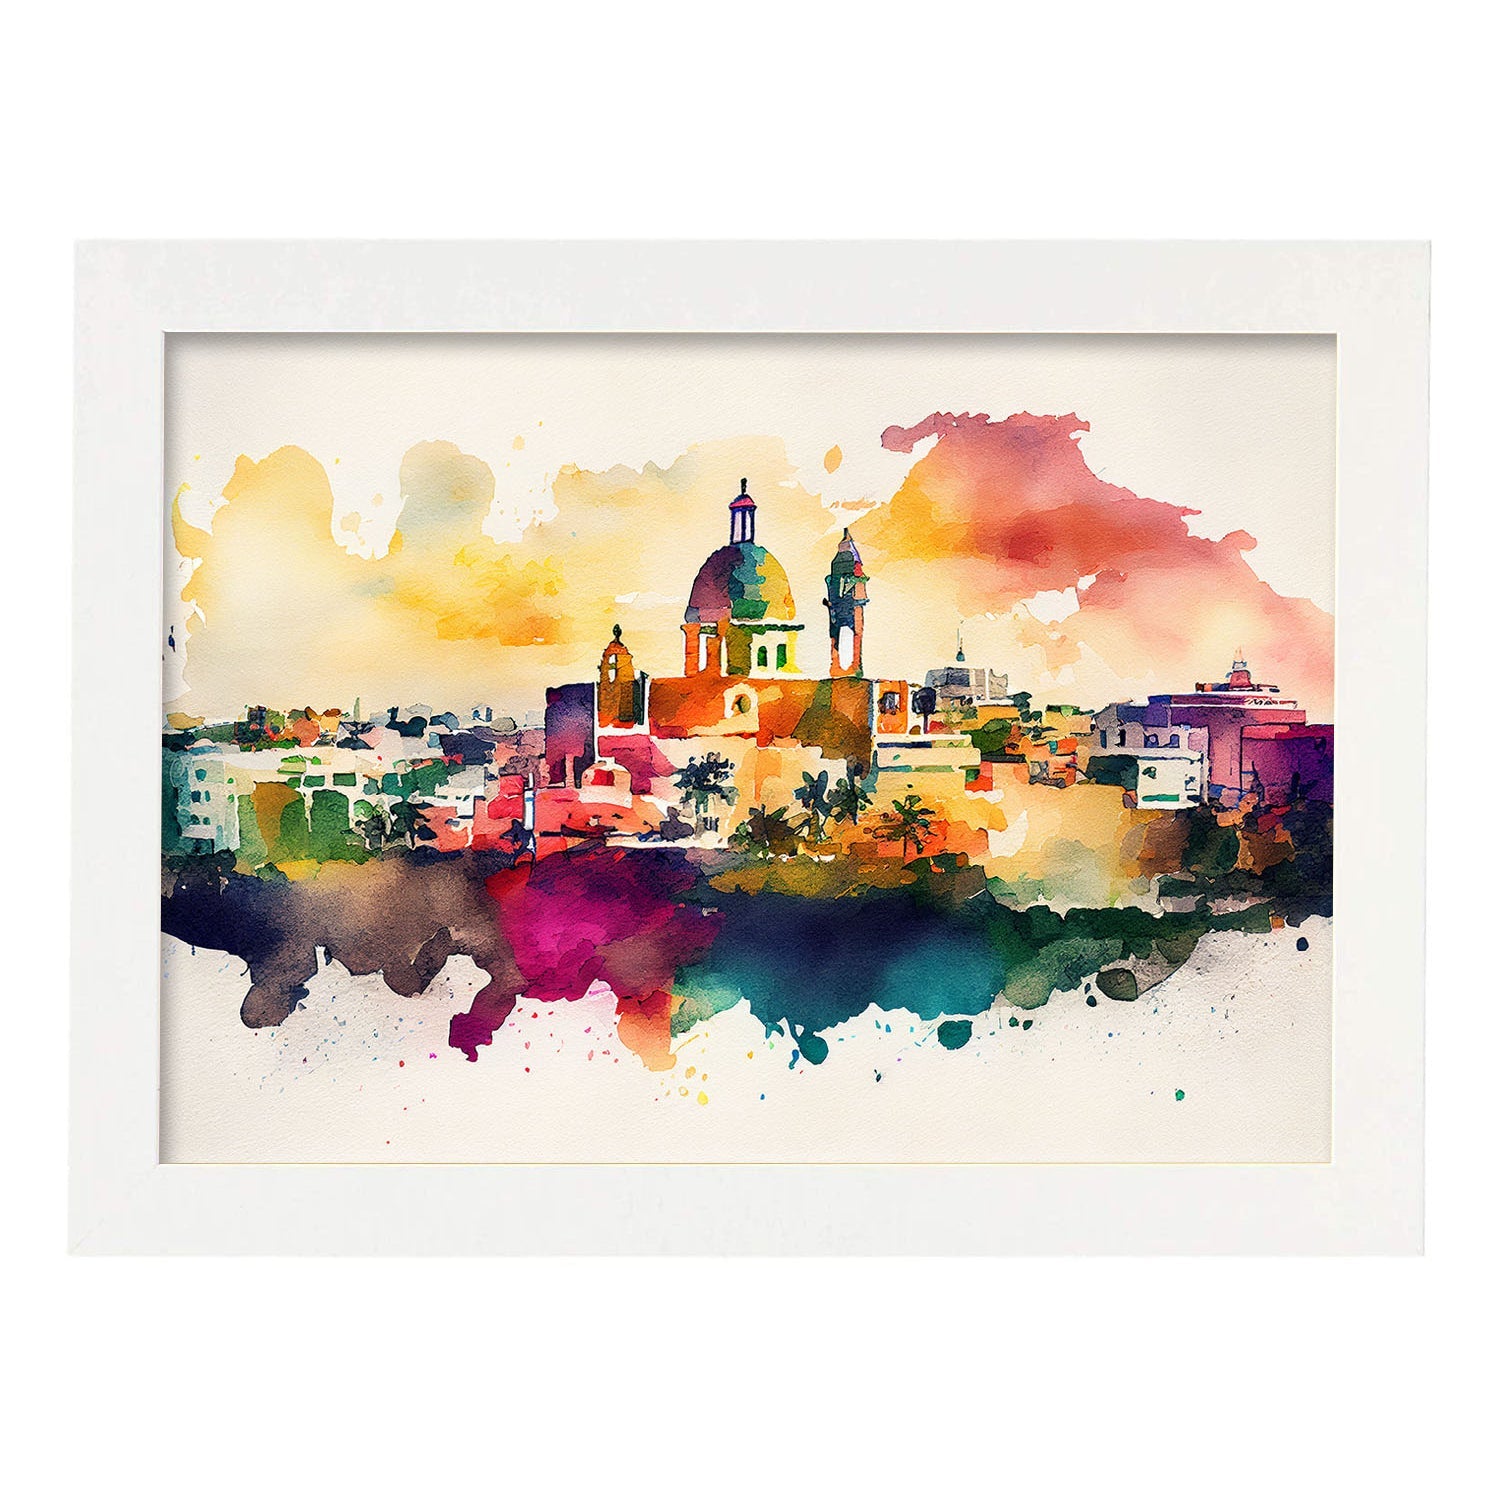 Nacnic watercolor of a skyline of the city of San Juan. Aesthetic Wall Art Prints for Bedroom or Living Room Design.-Artwork-Nacnic-A4-Marco Blanco-Nacnic Estudio SL